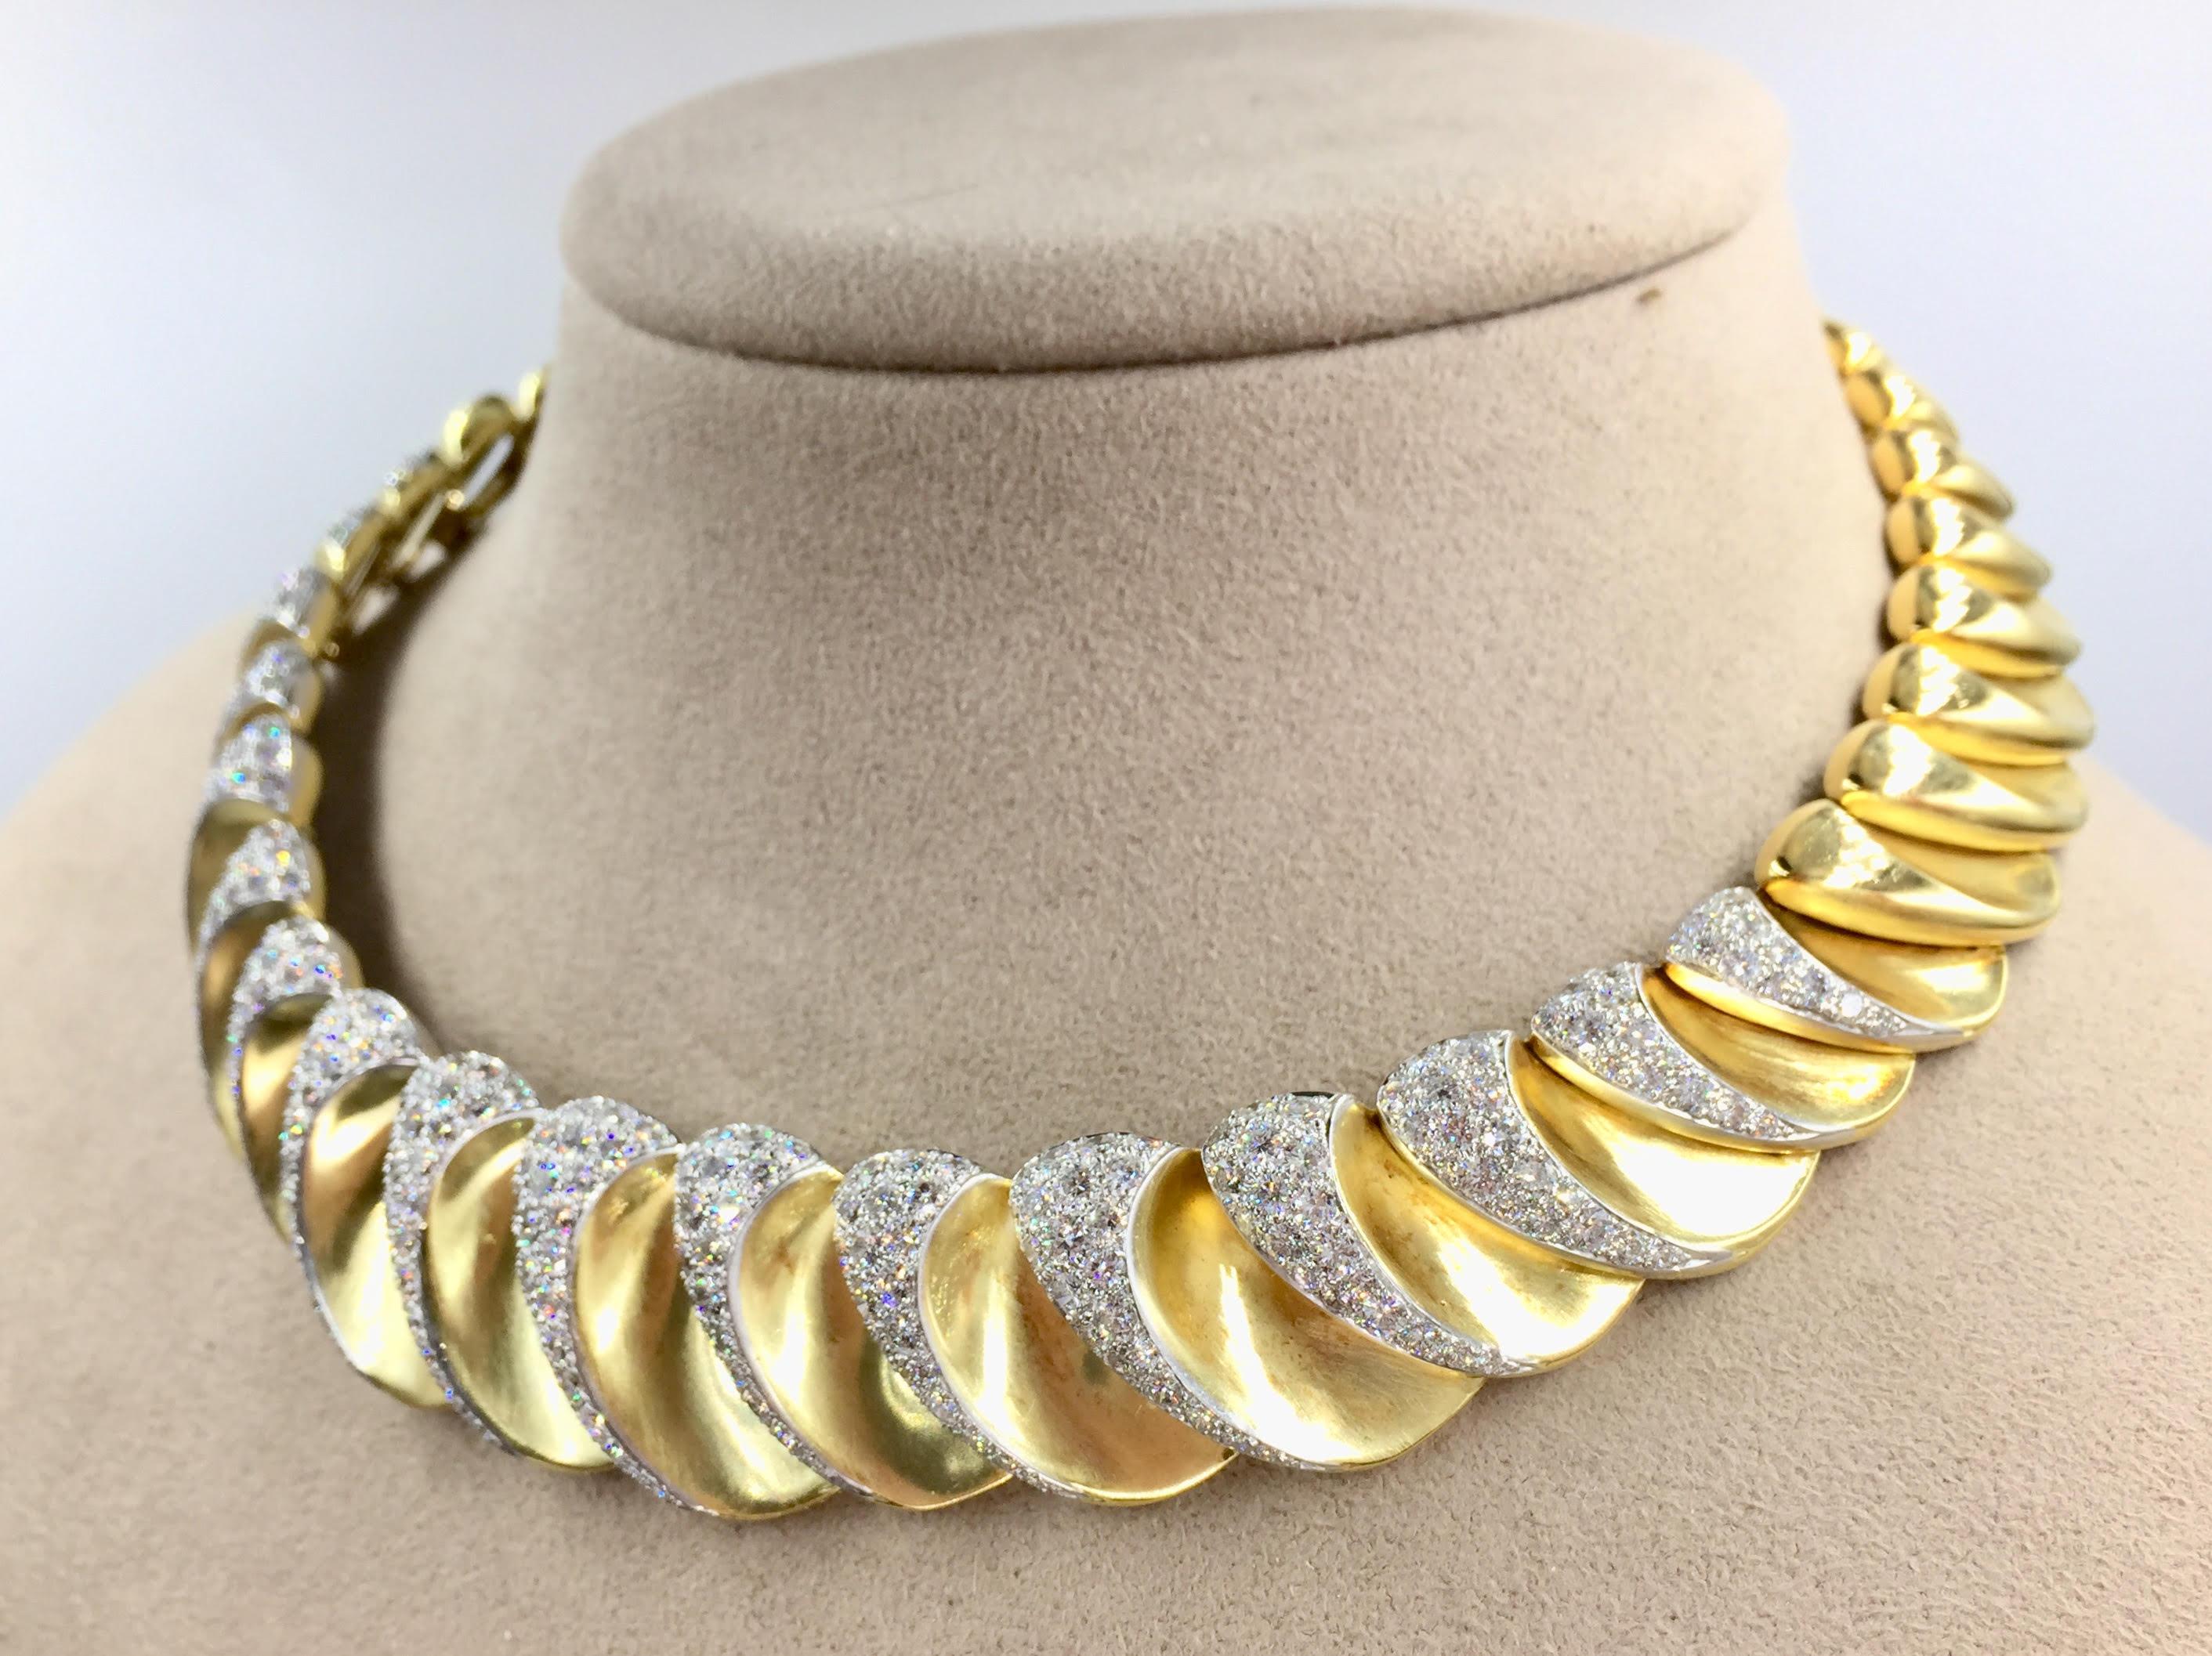 Handcrafted with extraordinary quality by Charles Turi, this unique and stunning collar necklace is expertly pavé set with 12.50 carats total weight of high quality diamonds - approximately F color, VS clarity. The solid scalloped 18k yellow gold